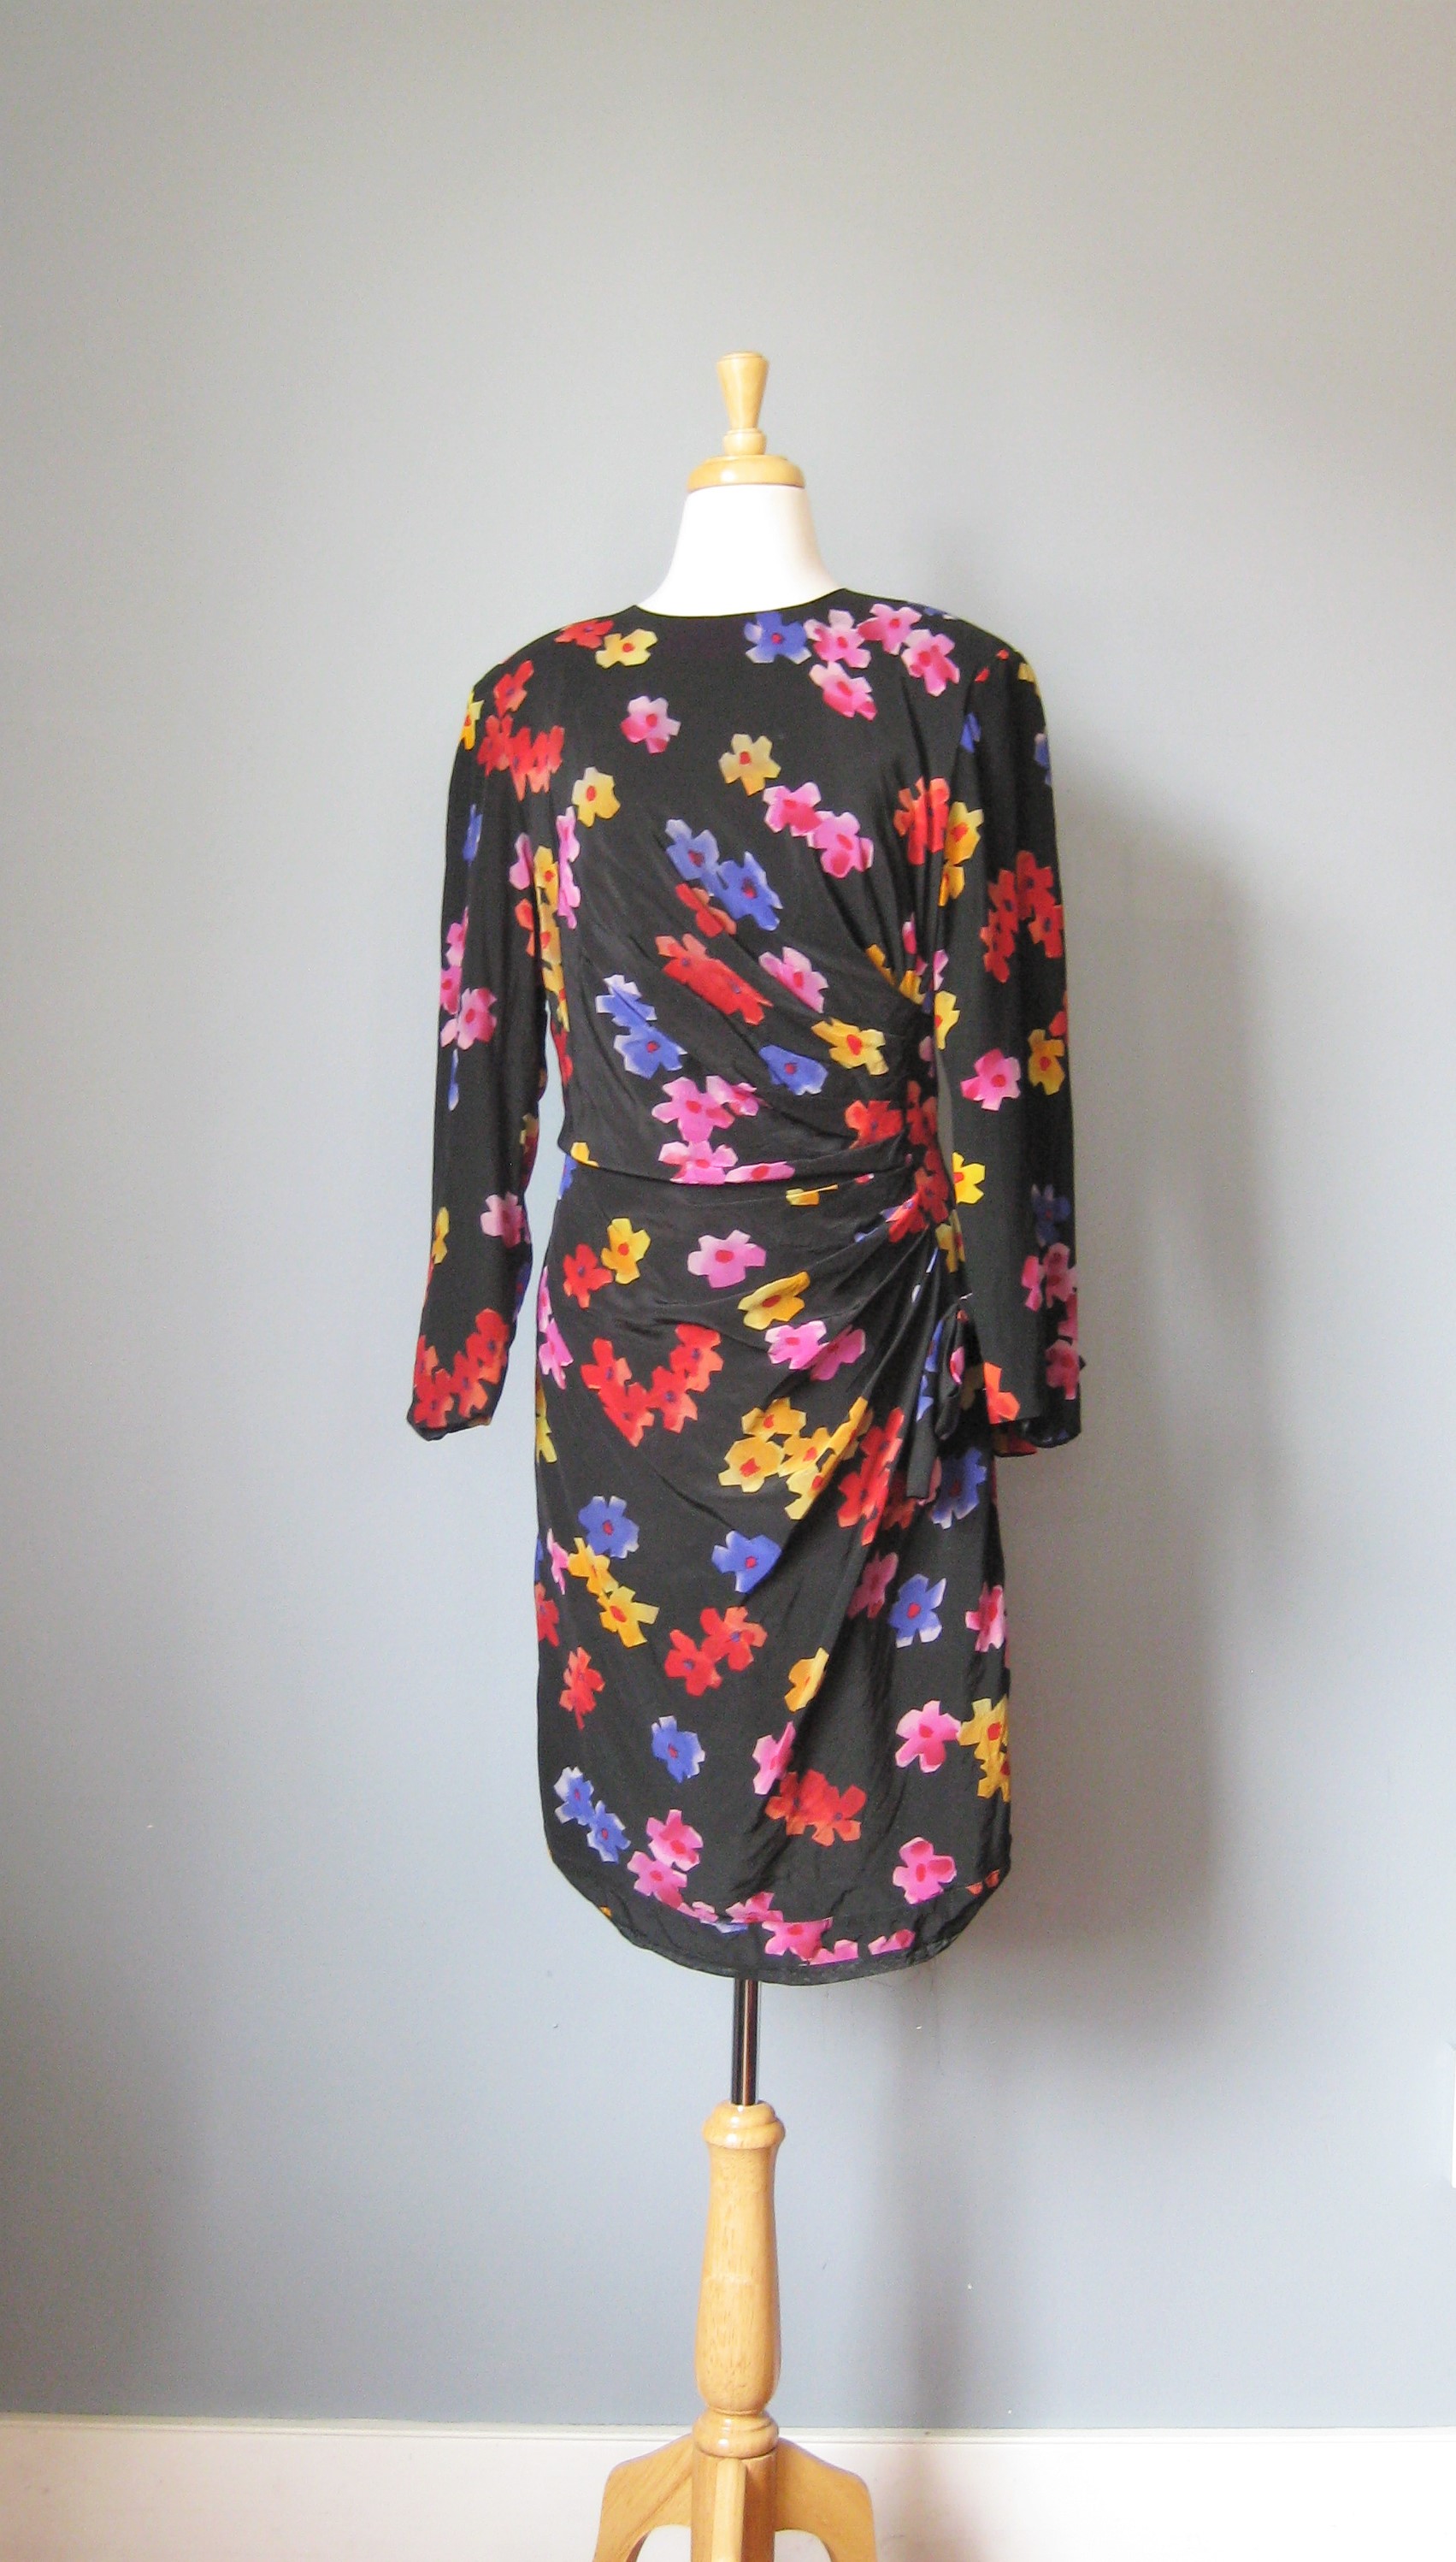 Scaasi floral silk fitted cocktail dress.
Black background with multi color floral pattern
The dress is shaped with ruching to the side for a very flattering silhouette
Fully lined
Jewel neckline
Long sleeves
shoulder pads
Marked size 14, but it would be small for a modern size 14
Flat measurements
Shoulder to shoulder: 17in
Armpit to Armpit: 20in
Waist: 17in
Hips: 20in

Thank you for looking.
#14219